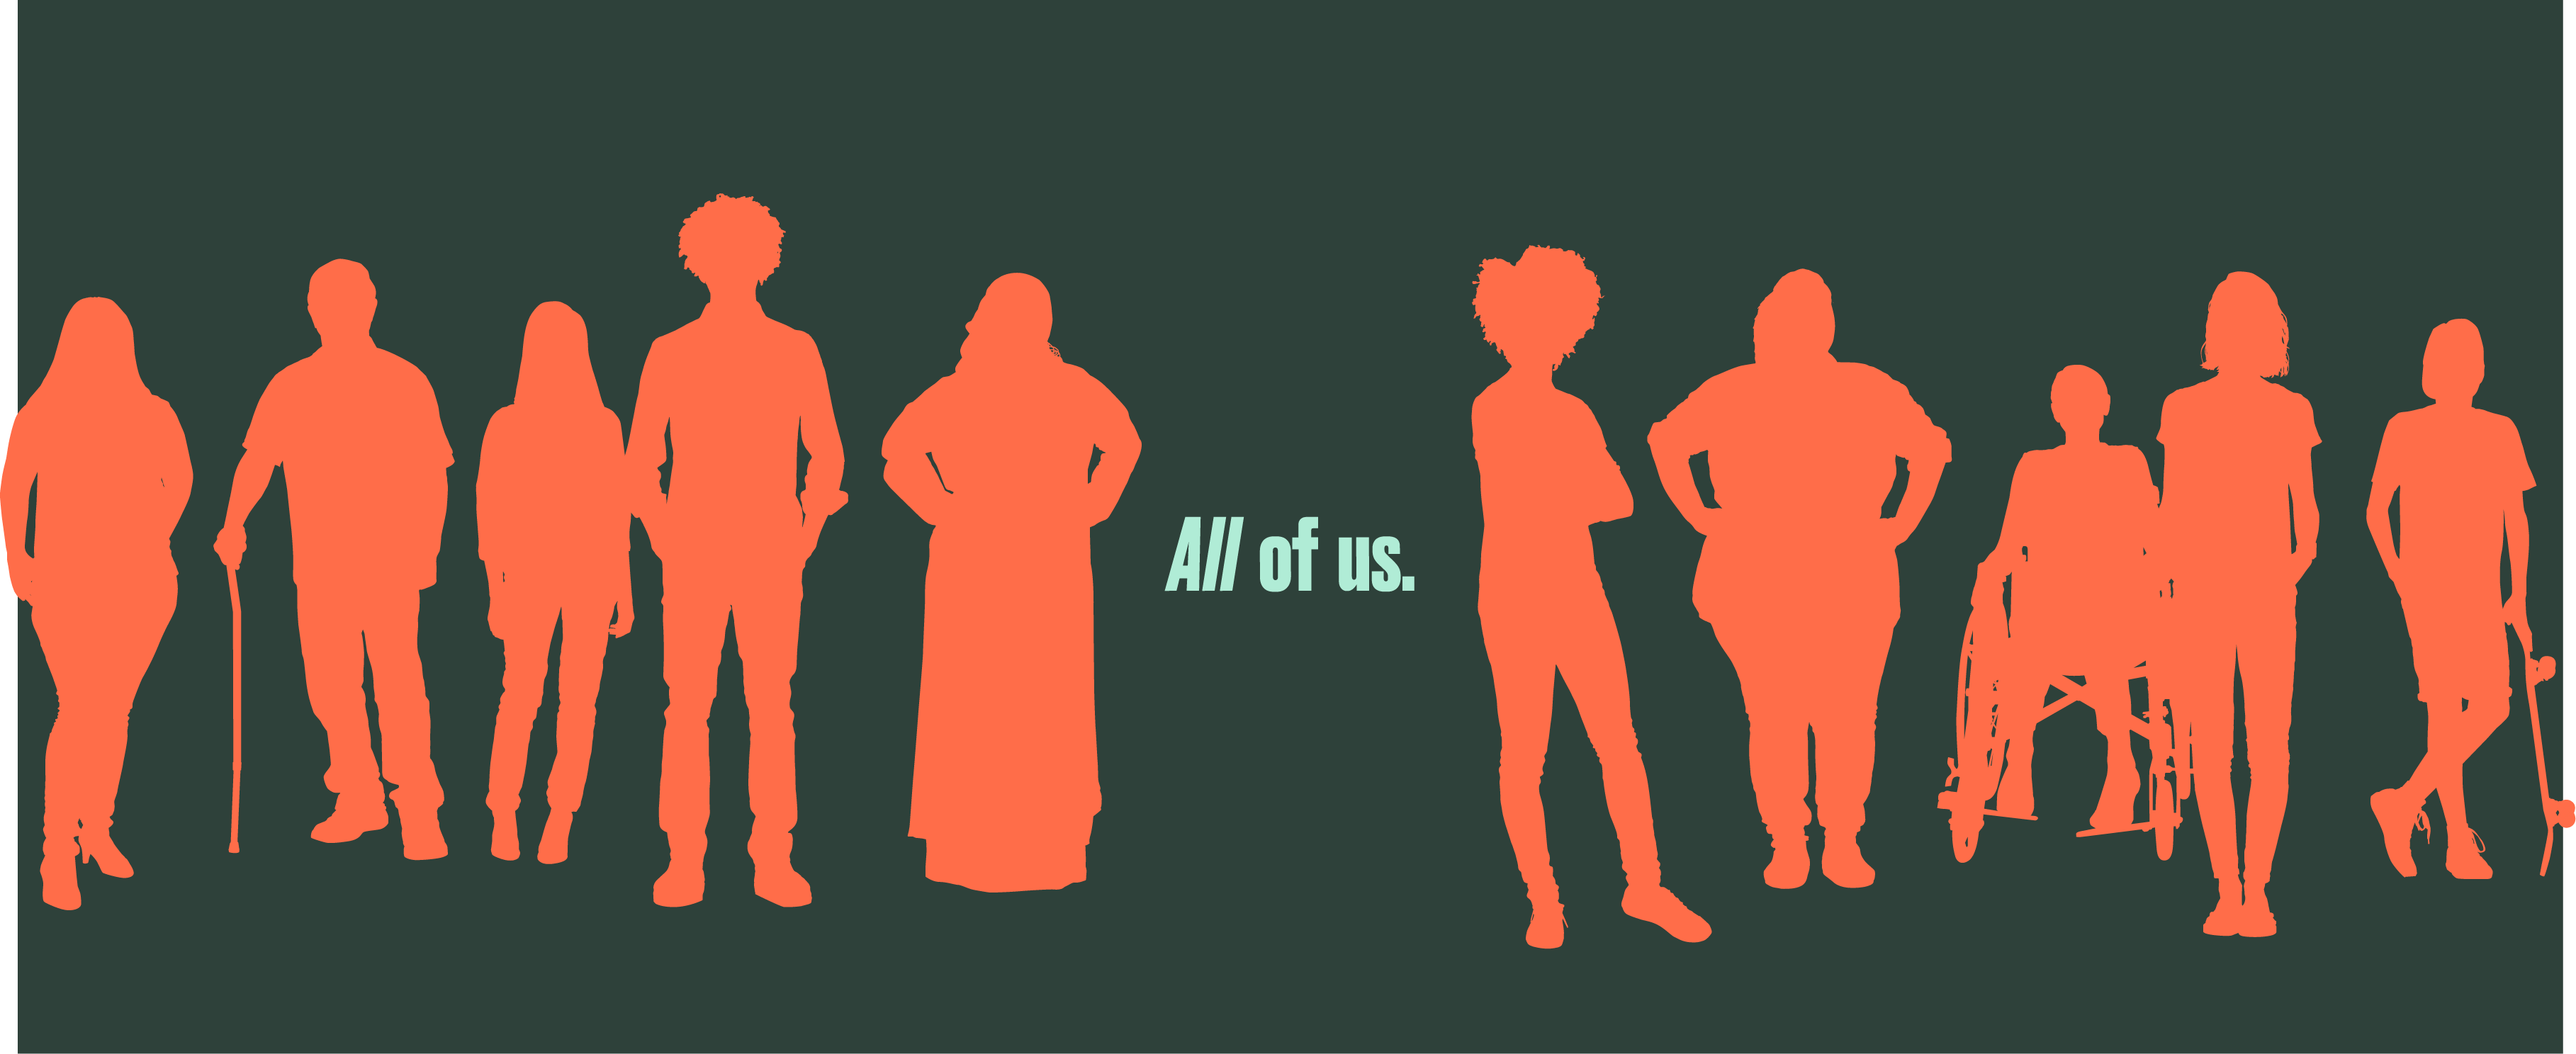 A digital graphic of ten, red silhouette figures of different hair styles, sizes, and abilities standing in a line against a gray background. In between them, in mint blue letters, reads, "All of us."